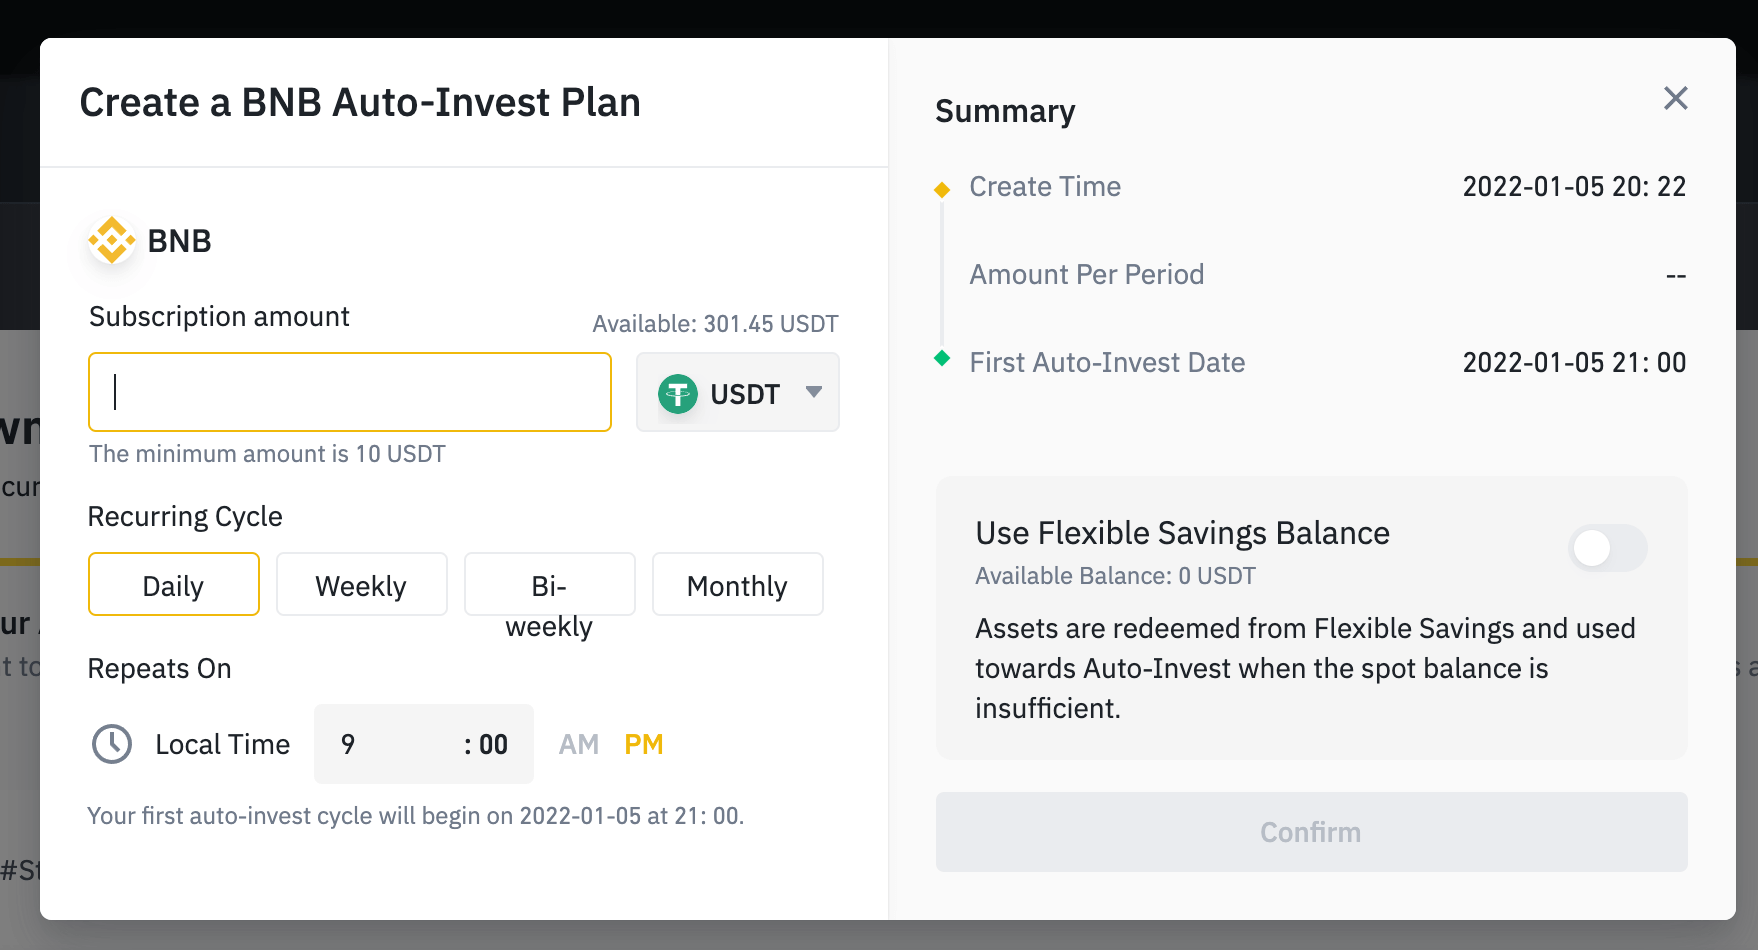 The example shows the configuration for a BNB Auto-Invest plan. The minimum investment amount is 10 USDT. The investment interval can be chosen between Daily, Weekly, Biweekly and Monthly.